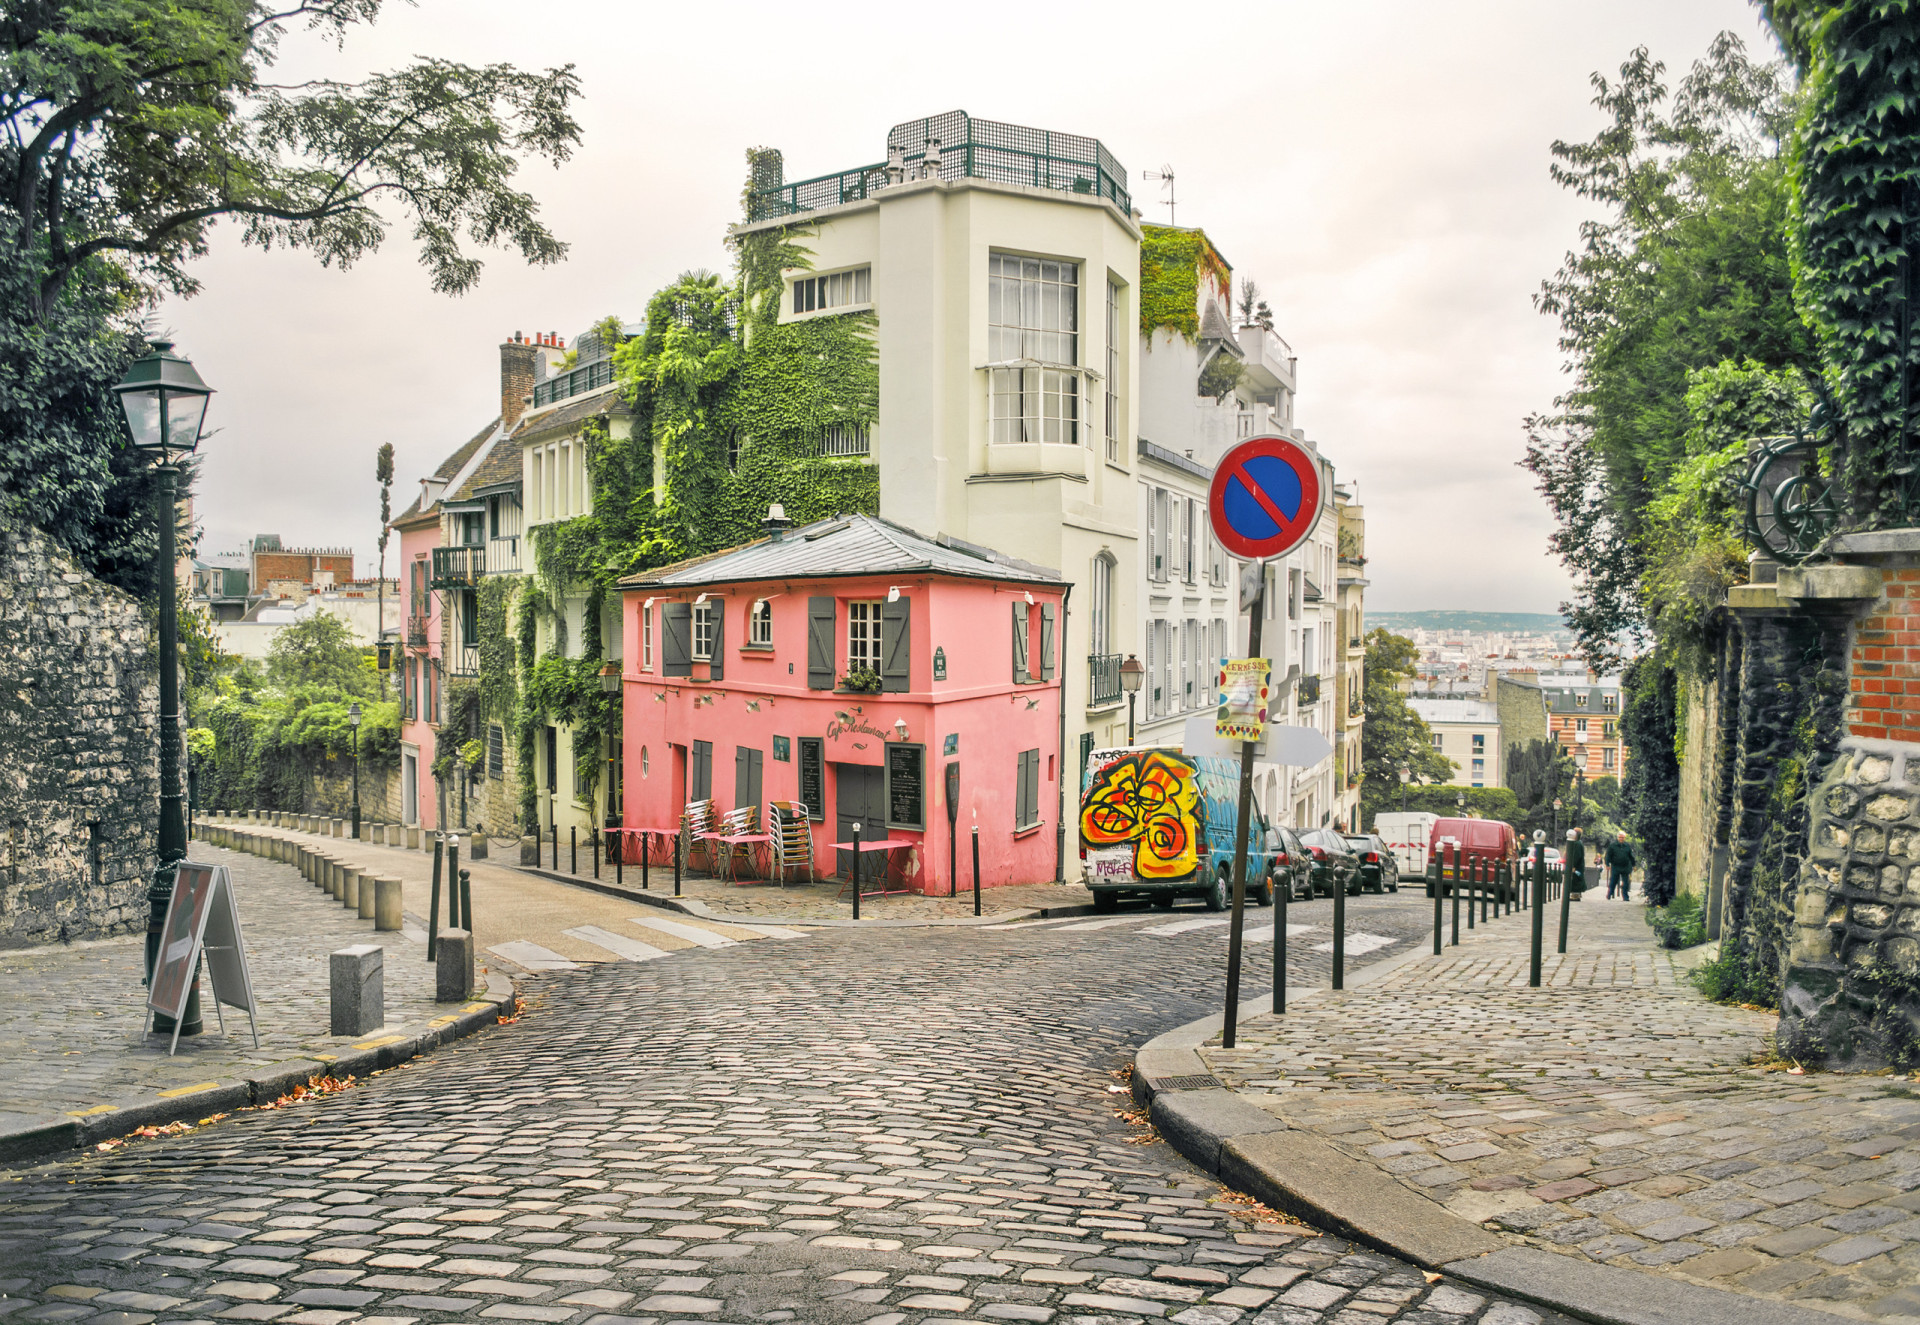 <p>Most films set in Paris have painted an image of a clean city. However, many tourists have been shocked with how dirty it actually is.</p><p><a href="https://www.msn.com/en-us/community/channel/vid-7xx8mnucu55yw63we9va2gwr7uihbxwc68fxqp25x6tg4ftibpra?cvid=94631541bc0f4f89bfd59158d696ad7e">Follow us and access great exclusive content every day</a></p>